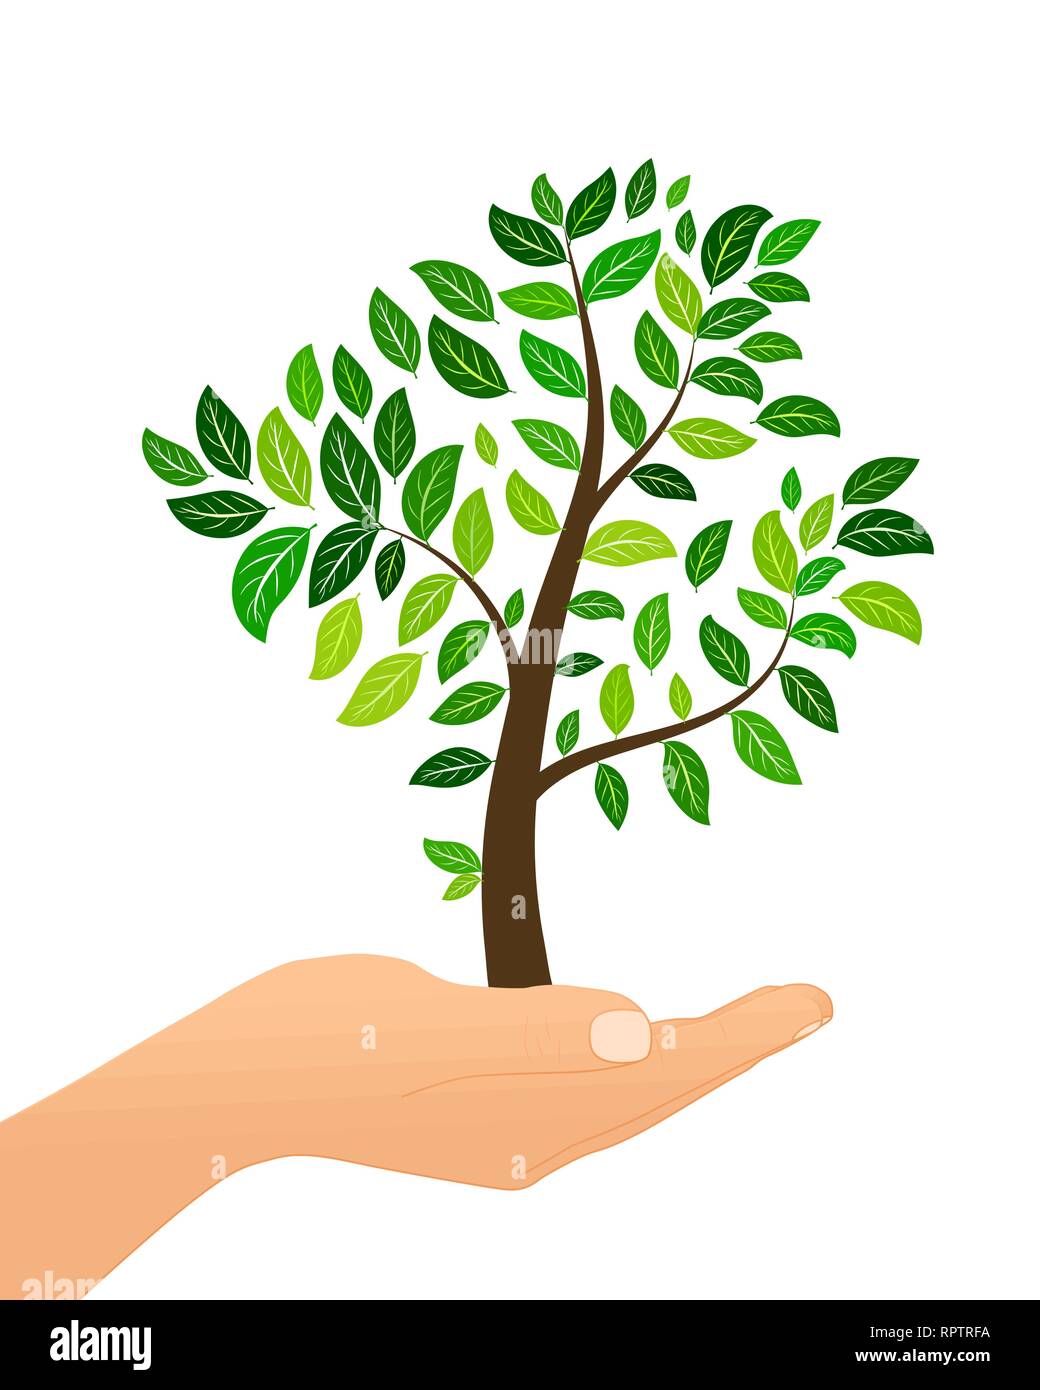 Tree With Green Leaves In Hand Isolaed On White Background Eco Concept Vector Illustration Stock Vector Image Art Alamy